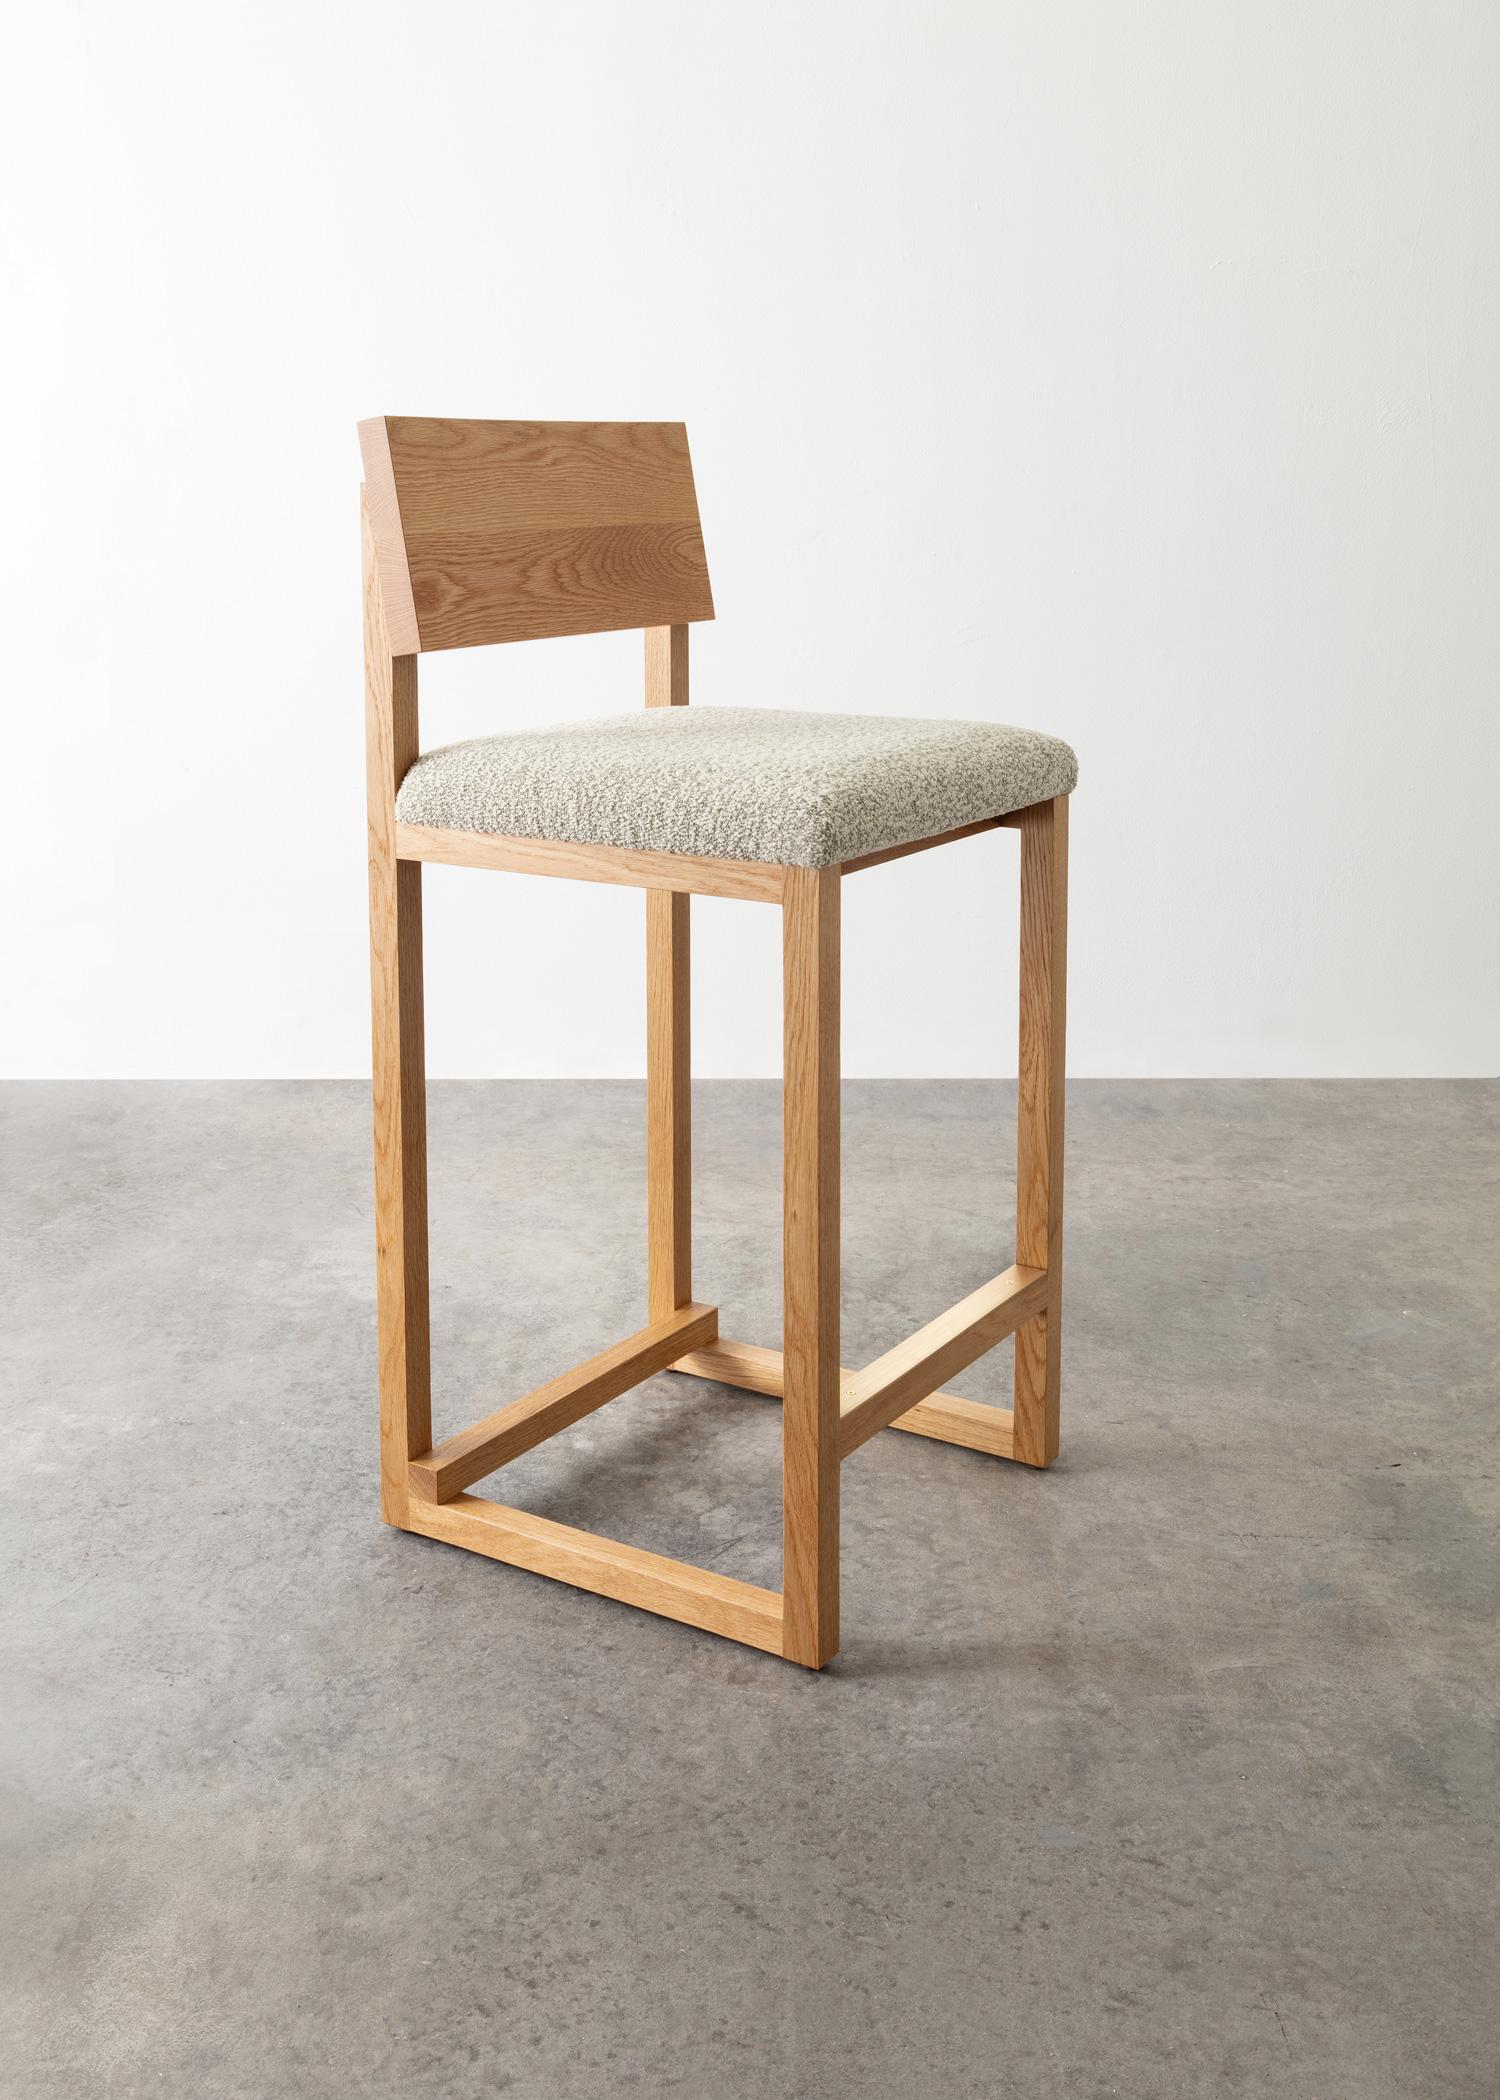 Shown in solid ash and solid black walnut, bouclé wool, and brass hardware

Available with:

Wood in ash, maple, walnut, or white oak with special edition ebonized ash or white washed ash upon custom request 

Upholstery in customer’s own material